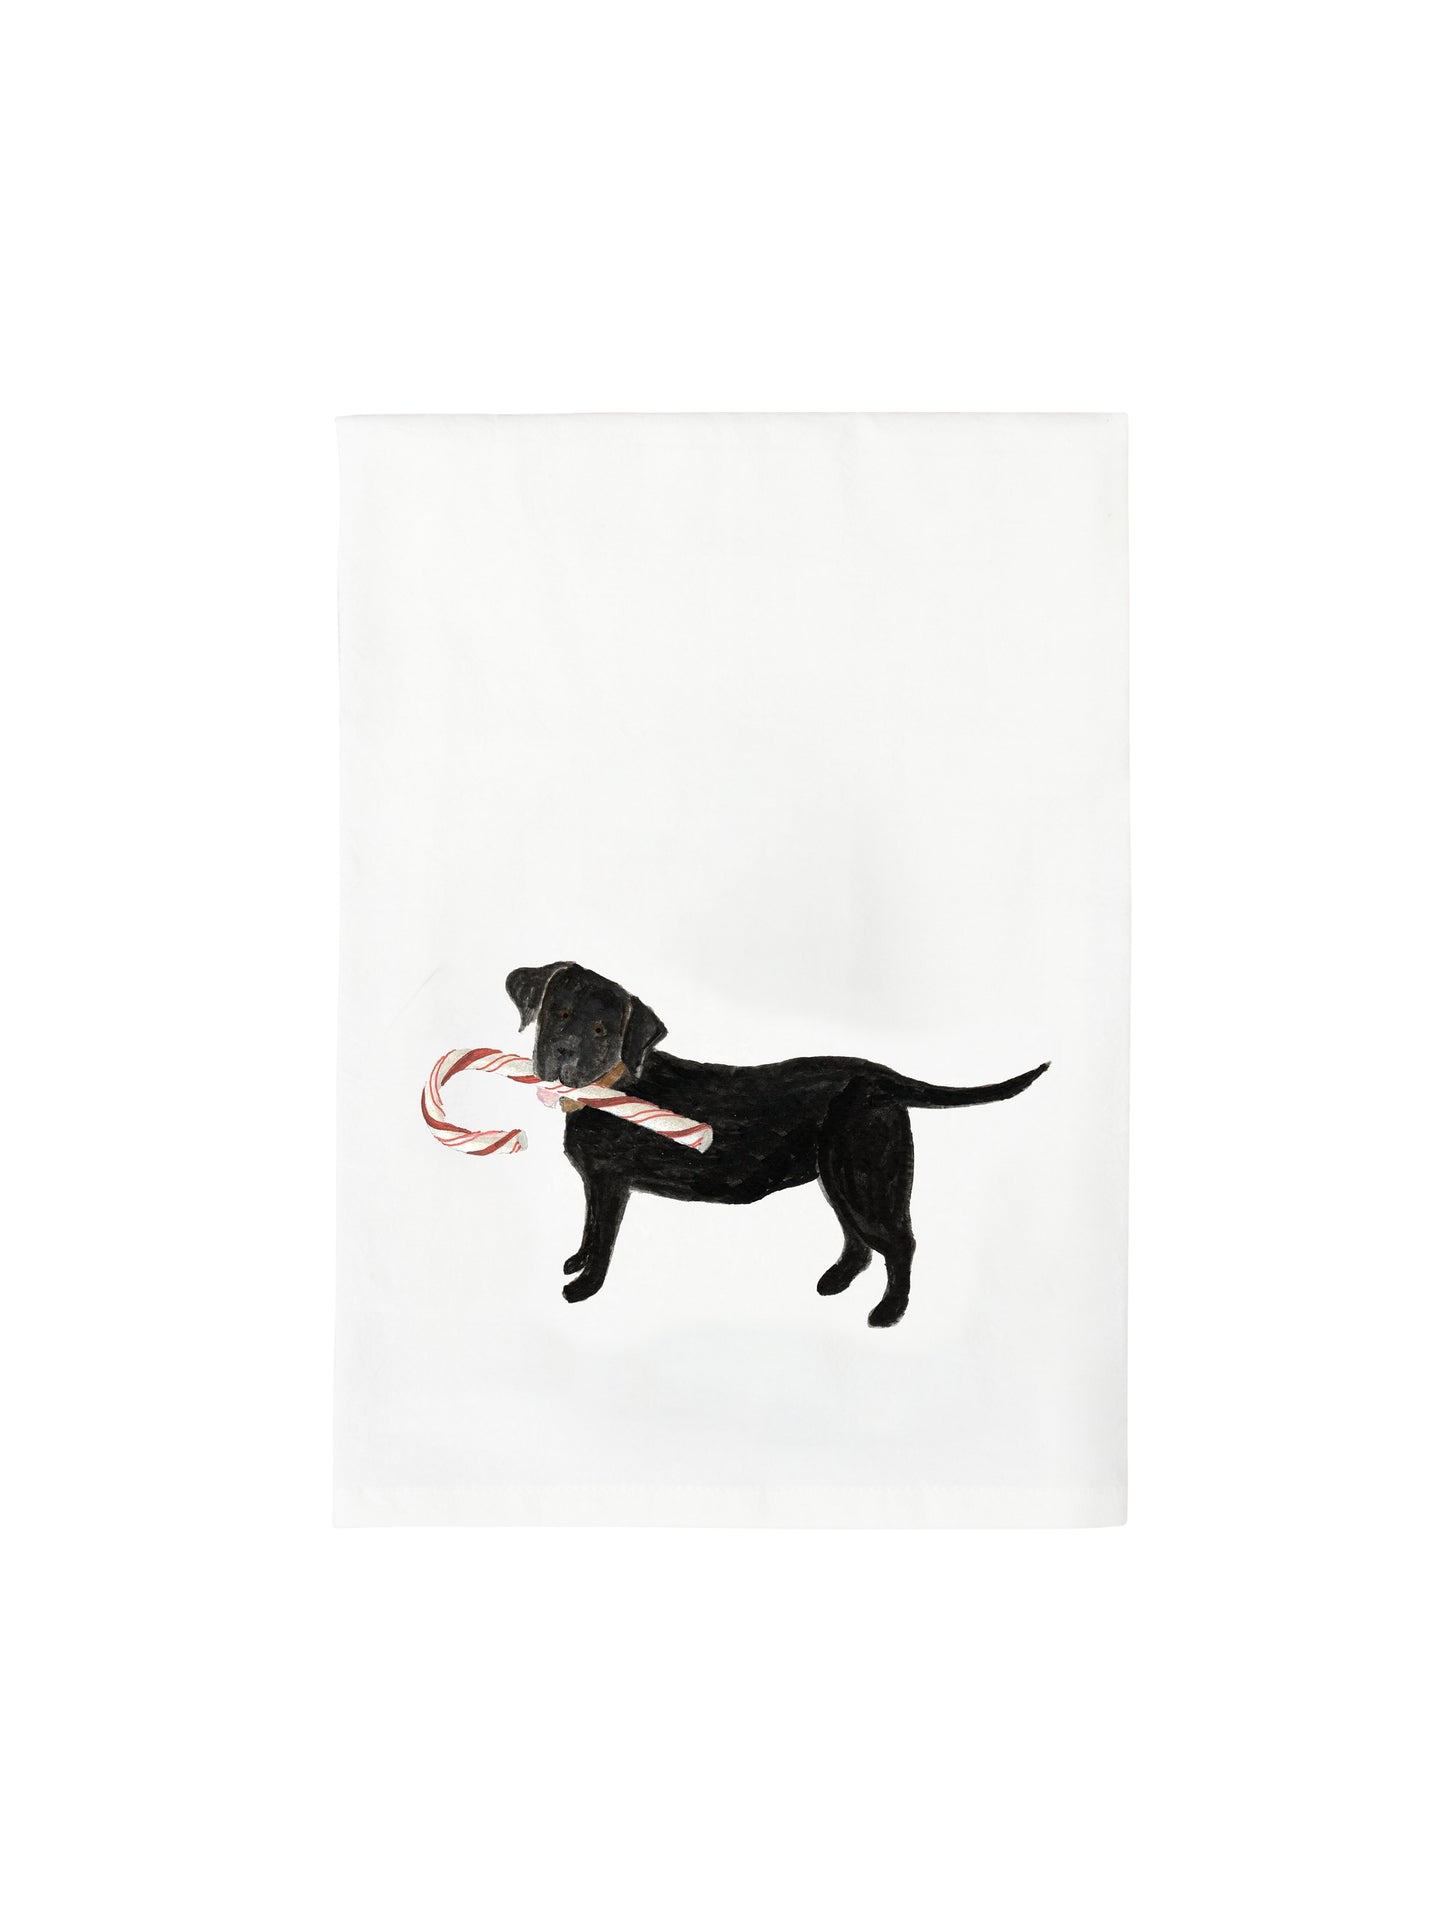 Ski and Holiday Dog Flour Sack Towels Black Lab with Candy Cane Weston Table